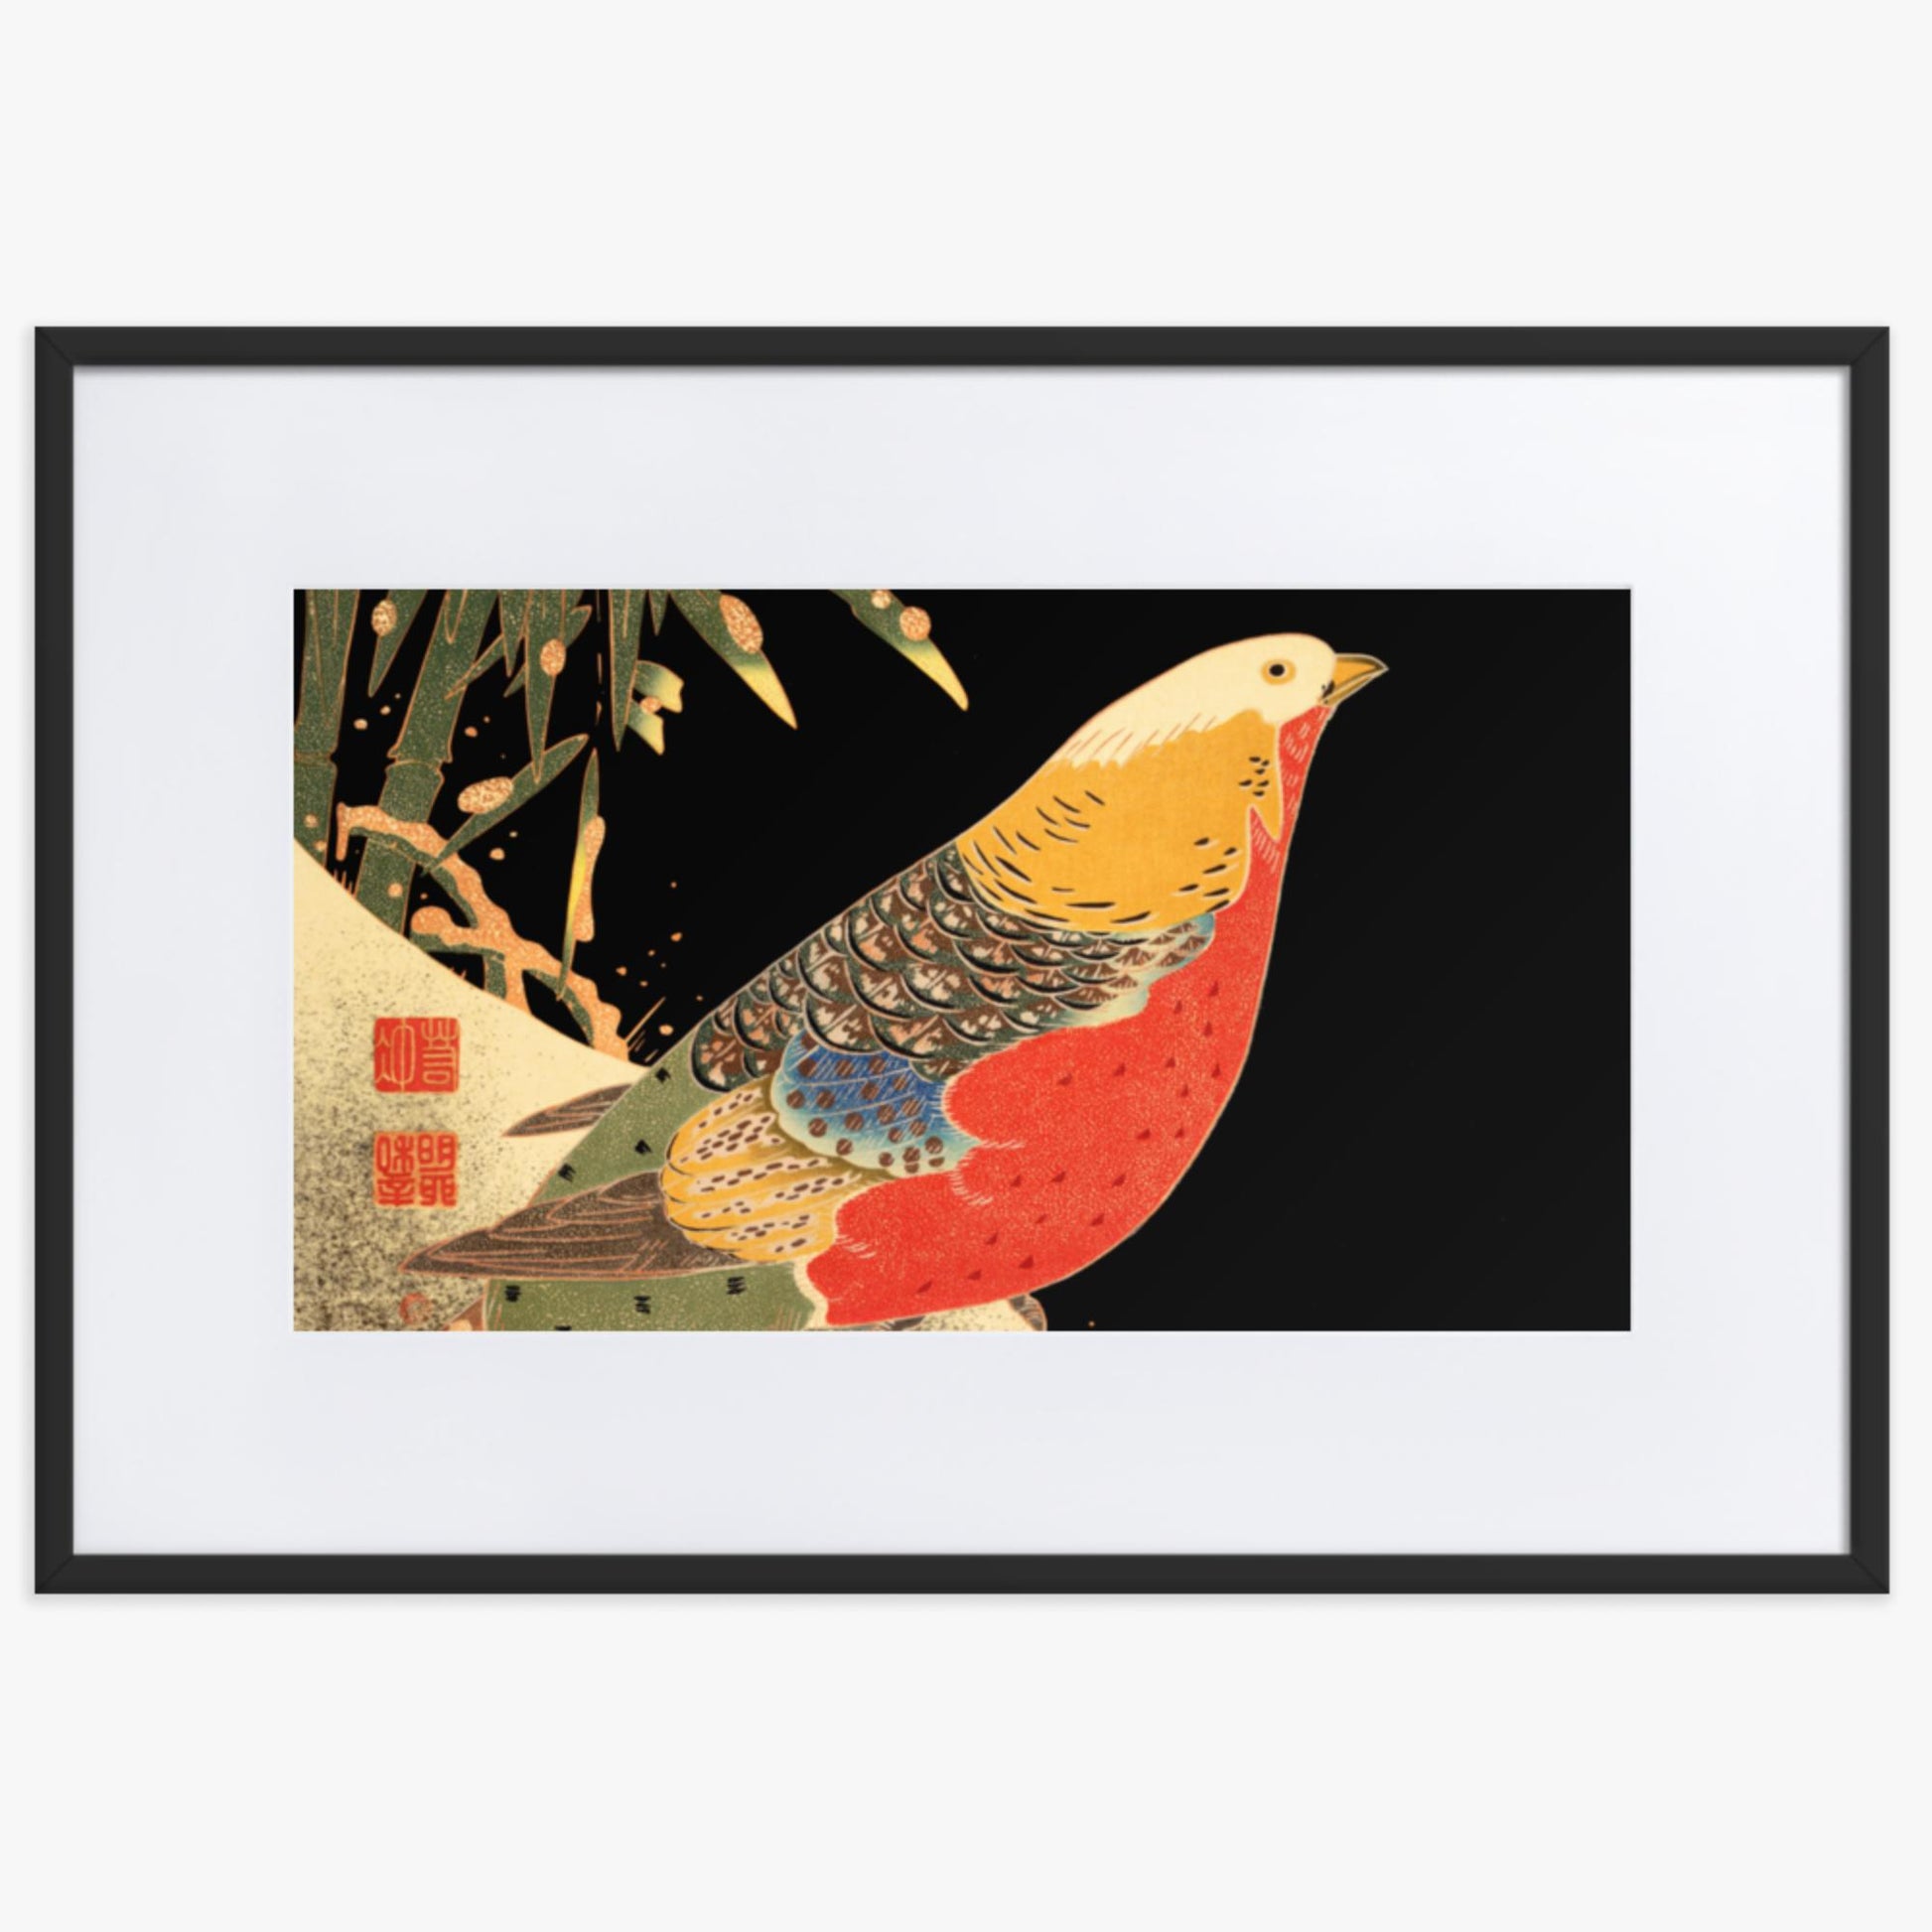 Ito Jakuchu - Golden Pheasant in the Snow 61x91 cm Poster With Black Frame